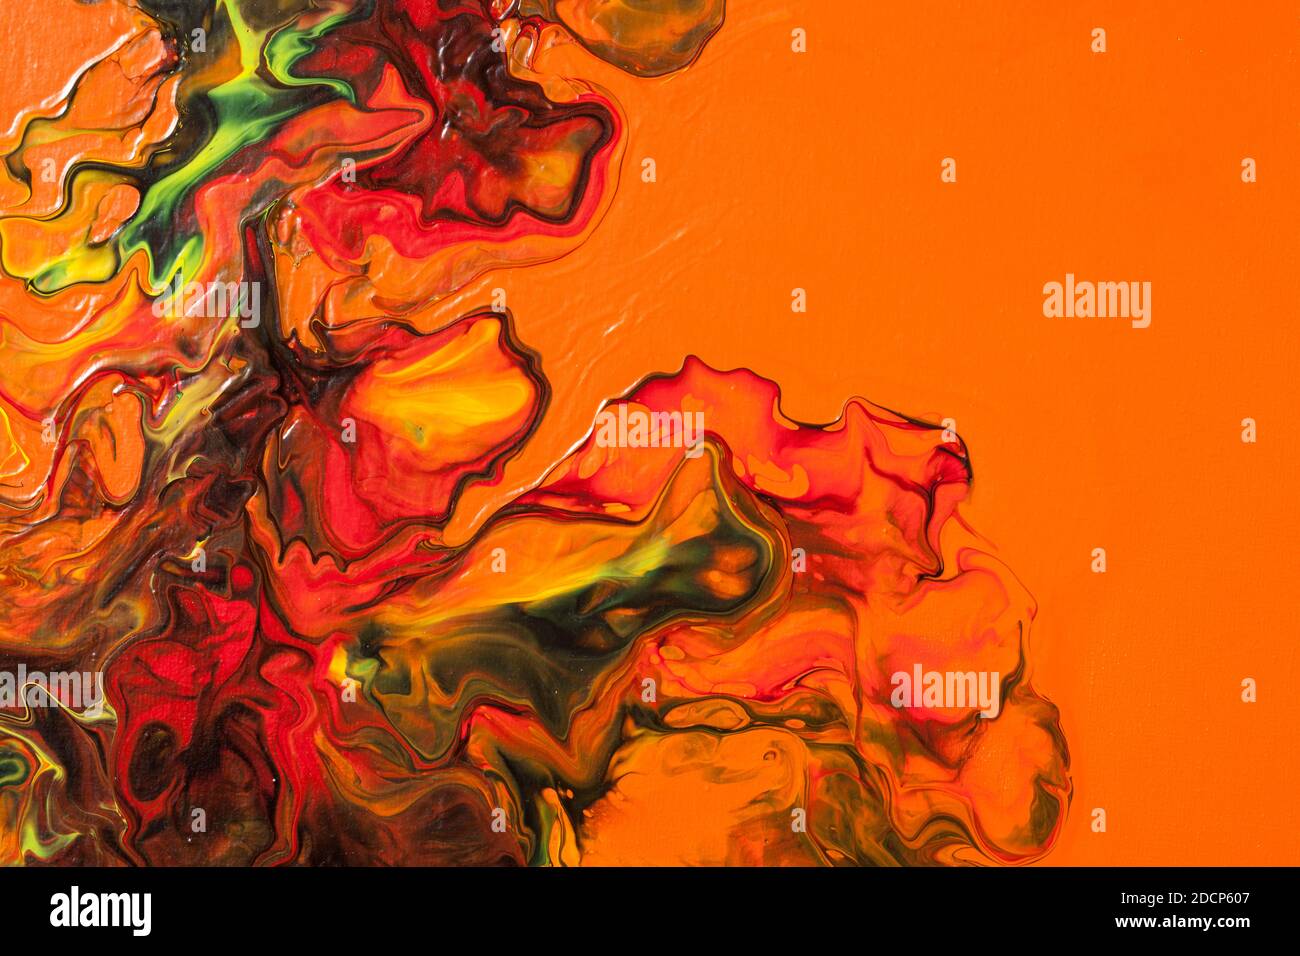 Fantastical floral pattern of liquid paint.  Orange fluid art abstract background Stock Photo